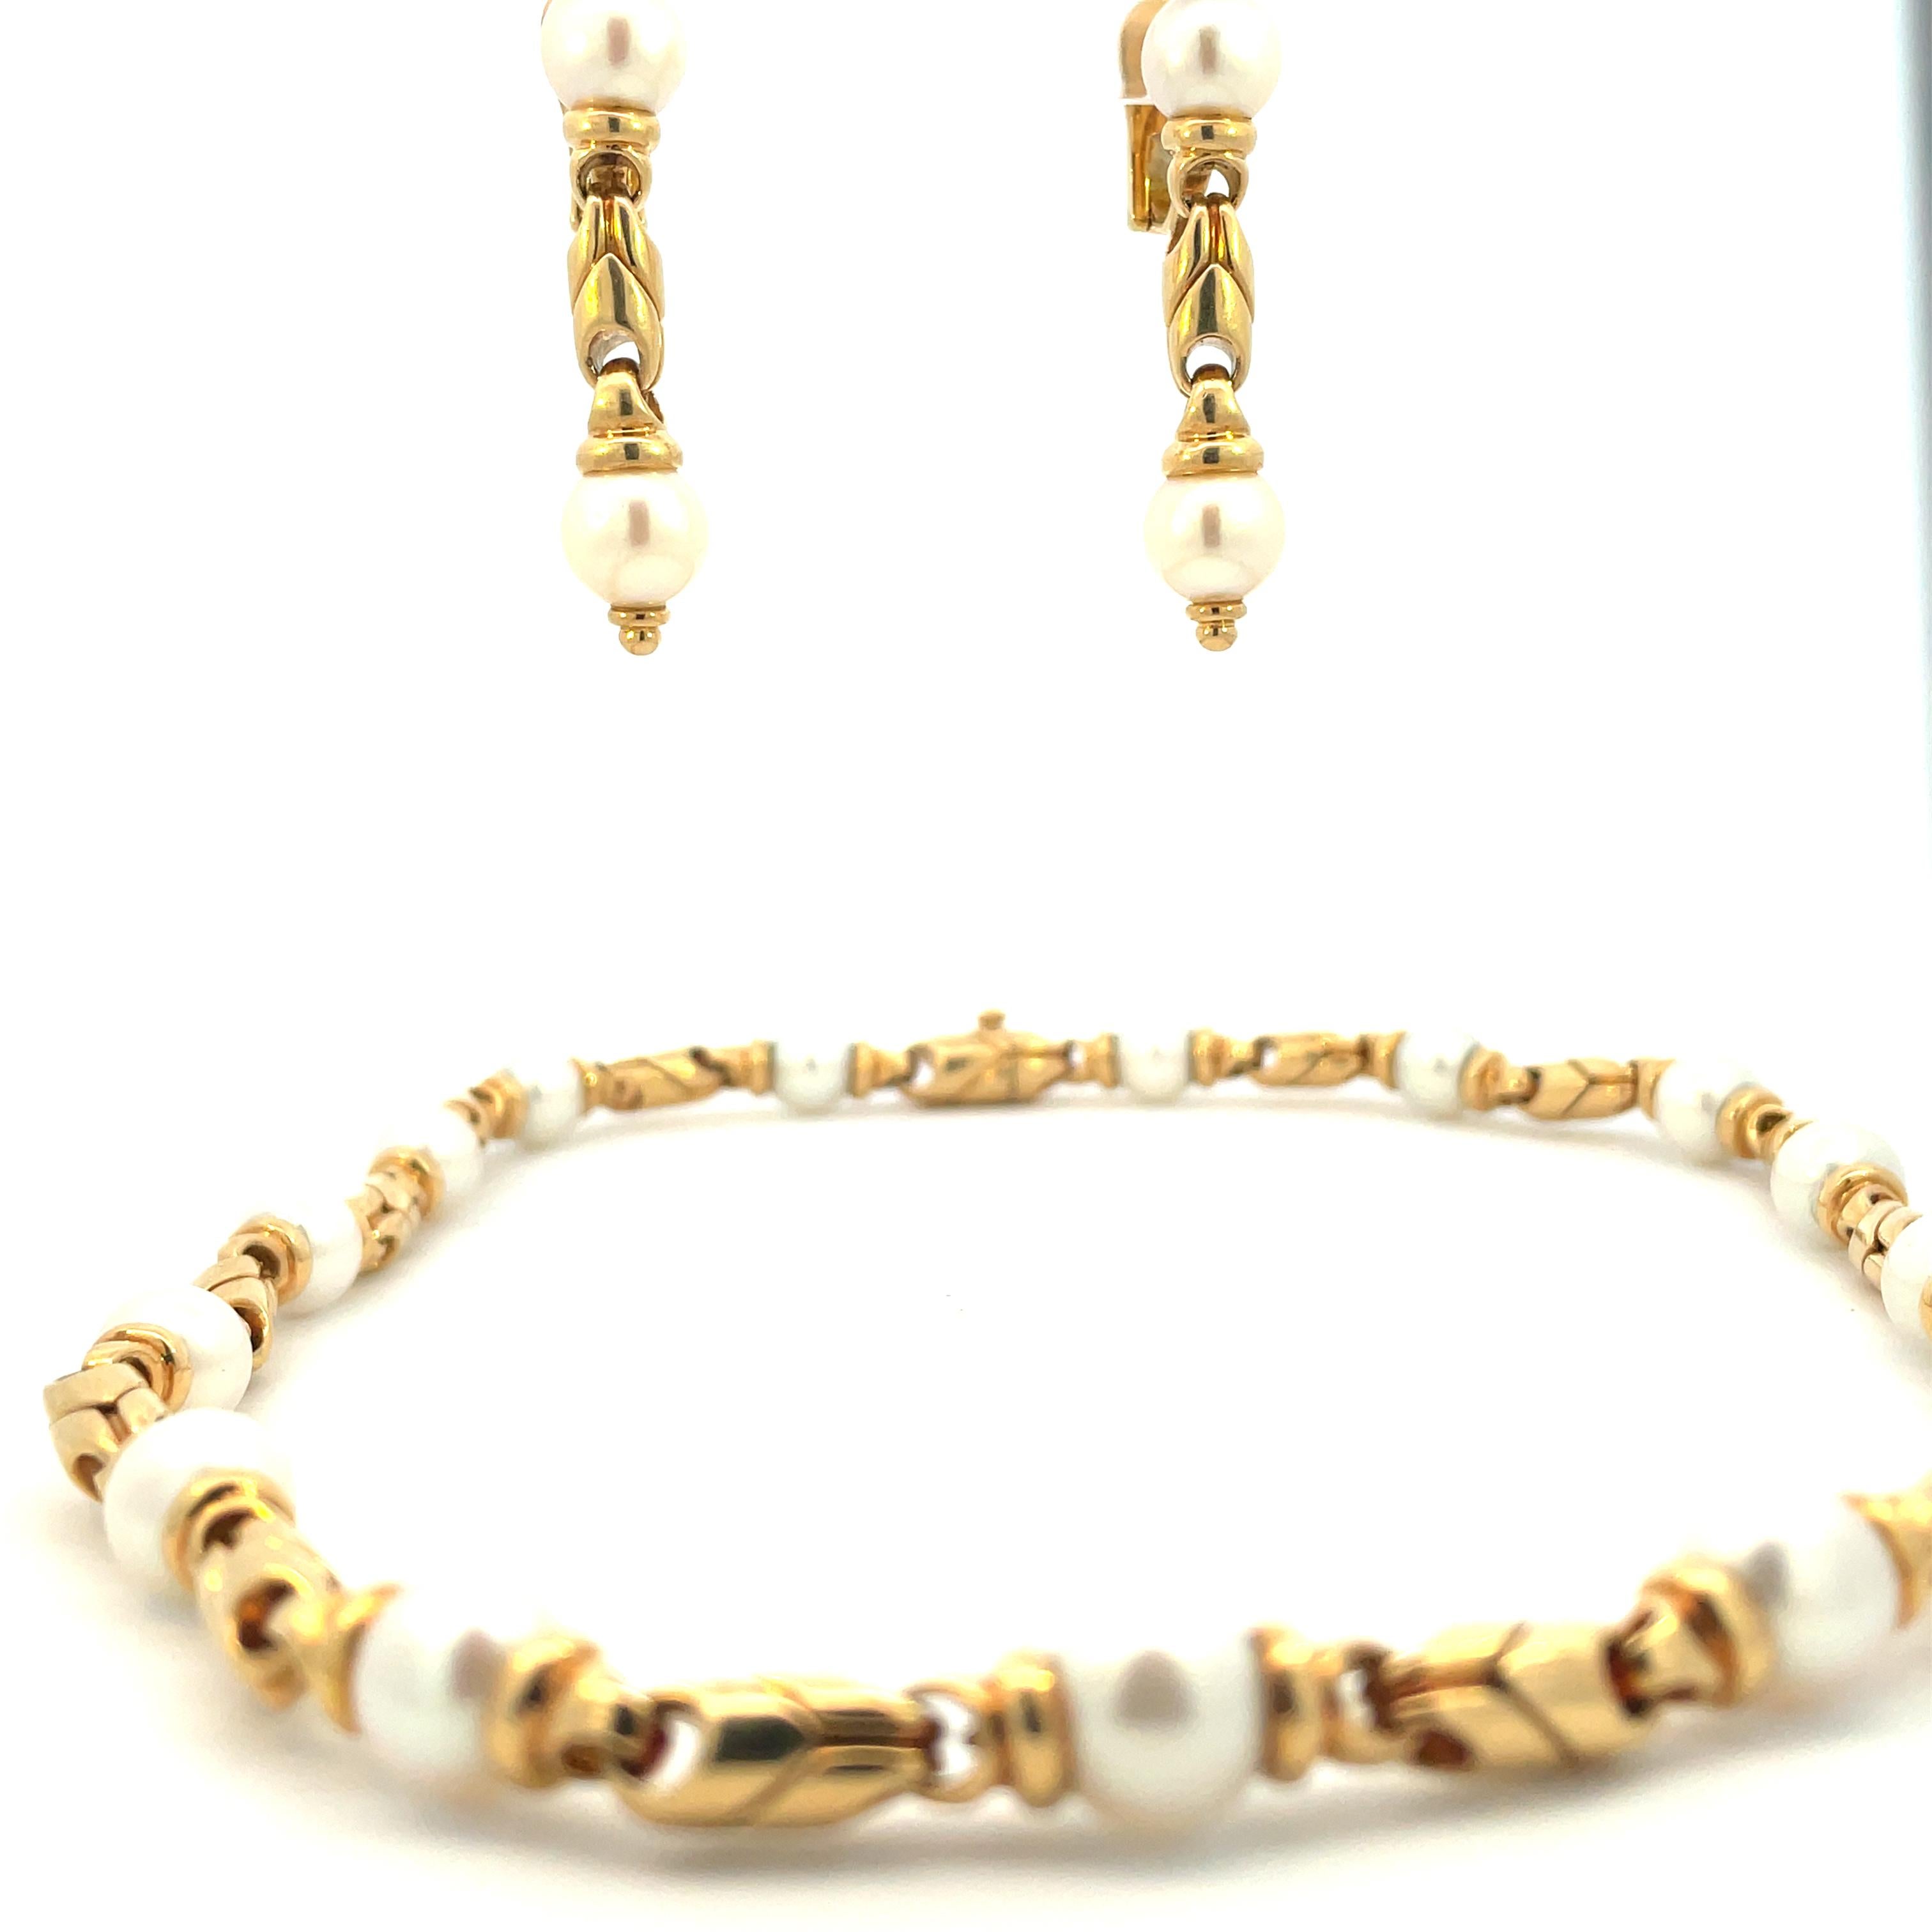 Doppio Passo Pearl Necklace and matching Doppio Passo Pearl Earrings is comprised of deeply grooved Passo Doppio gold links. Alternating with 8.0 mm round pearls set between gold terminals. White body color with rosé overtones and very good luster.